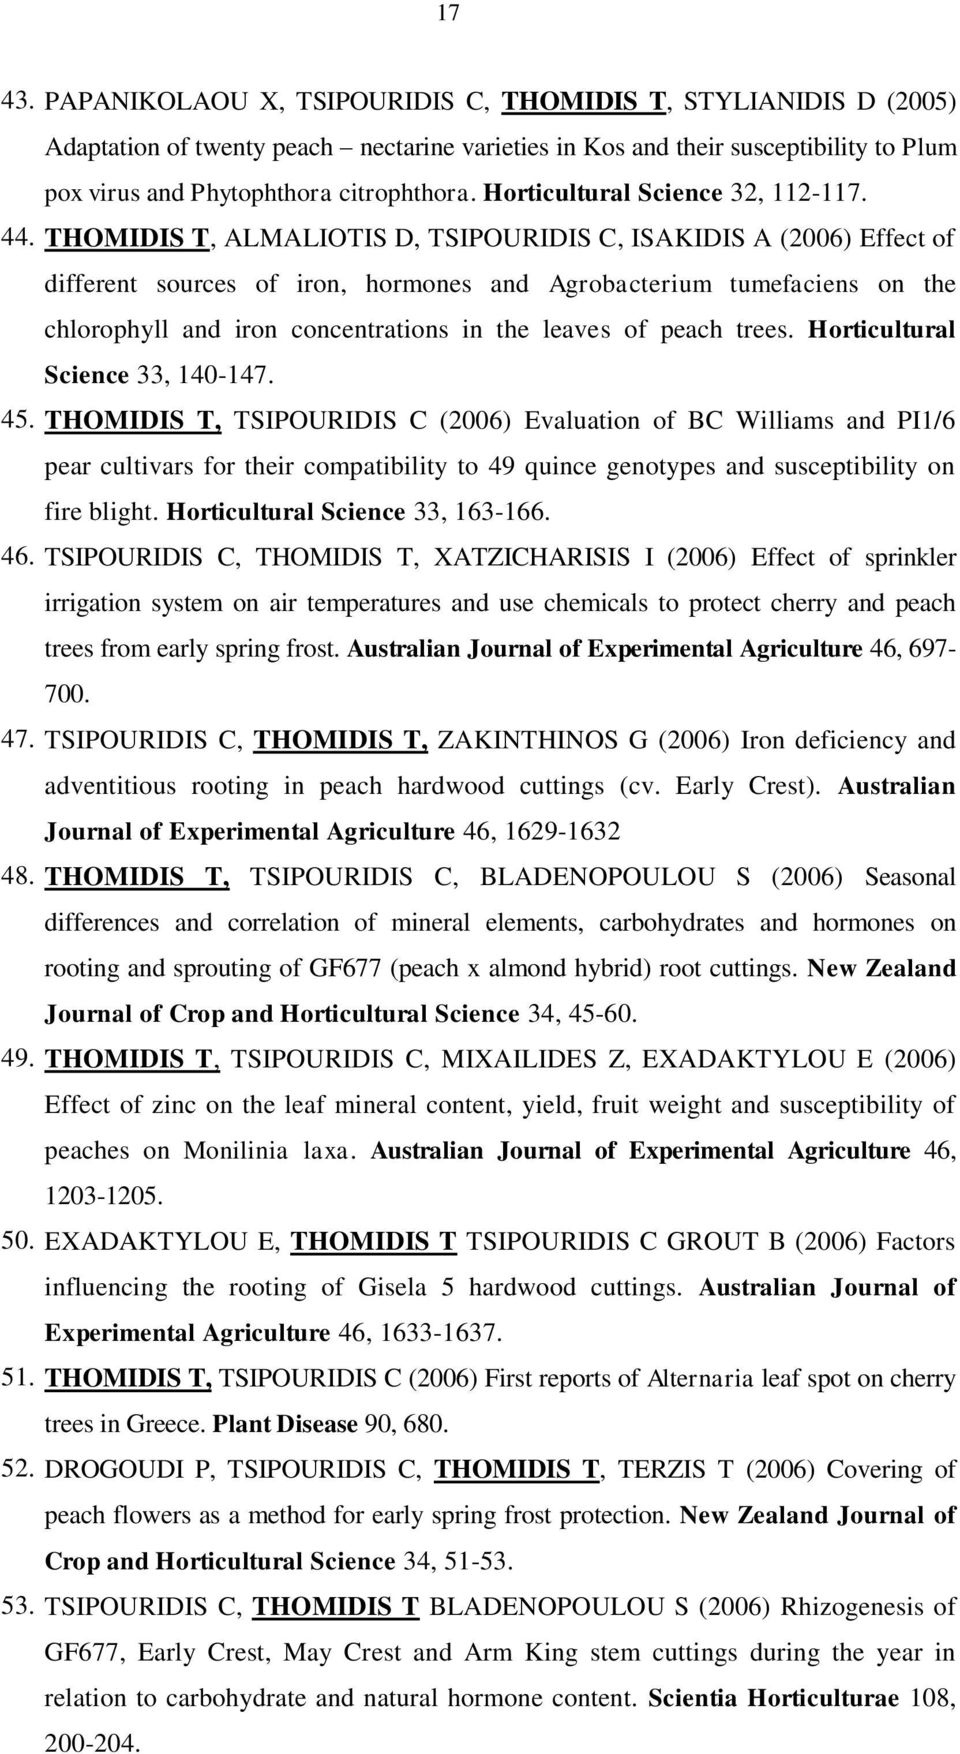 THOMIDIS T, ALMALIOTIS D, TSIPOURIDIS C, ISAKIDIS A (2006) Effect of different sources of iron, hormones and Agrobacterium tumefaciens on the chlorophyll and iron concentrations in the leaves of